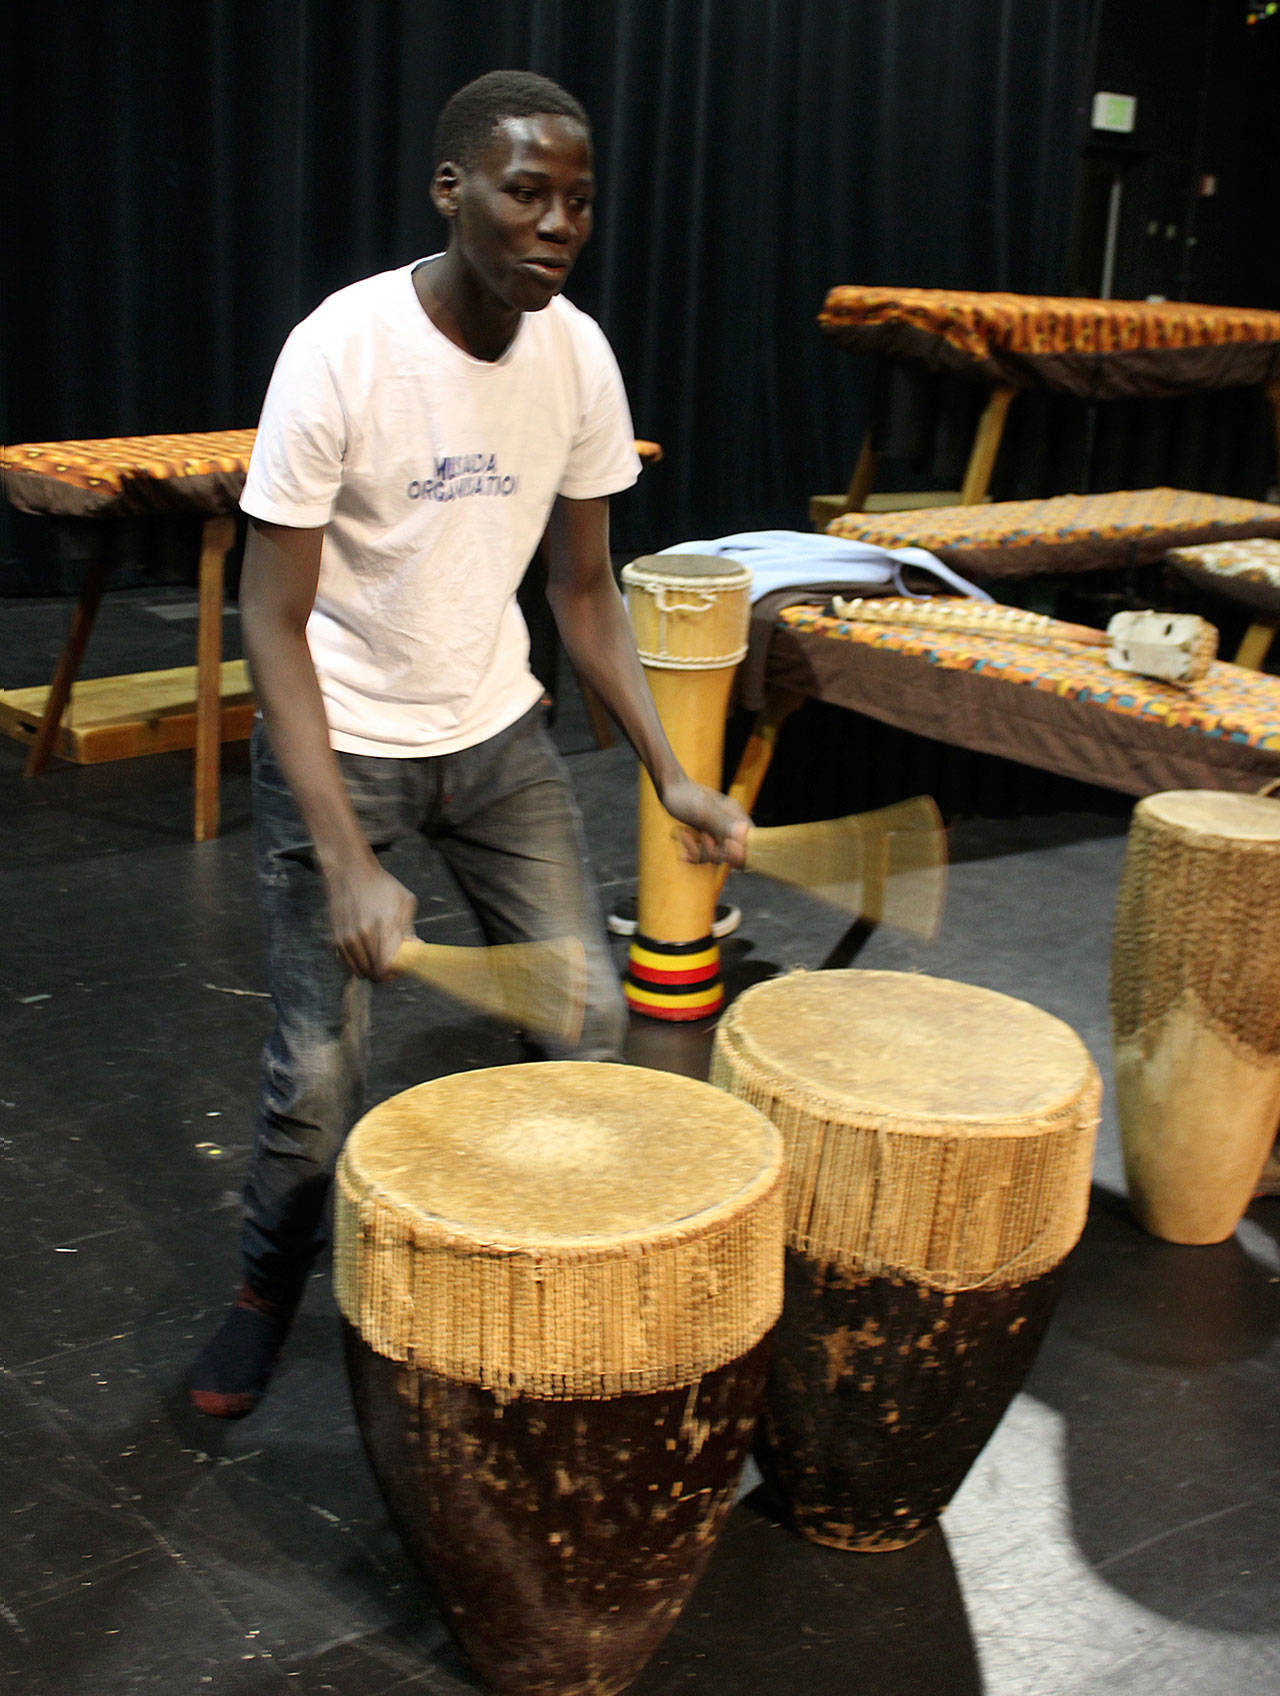 Drummer Bosco Okema of Dance of Hope seems in perpetual motion during performances.